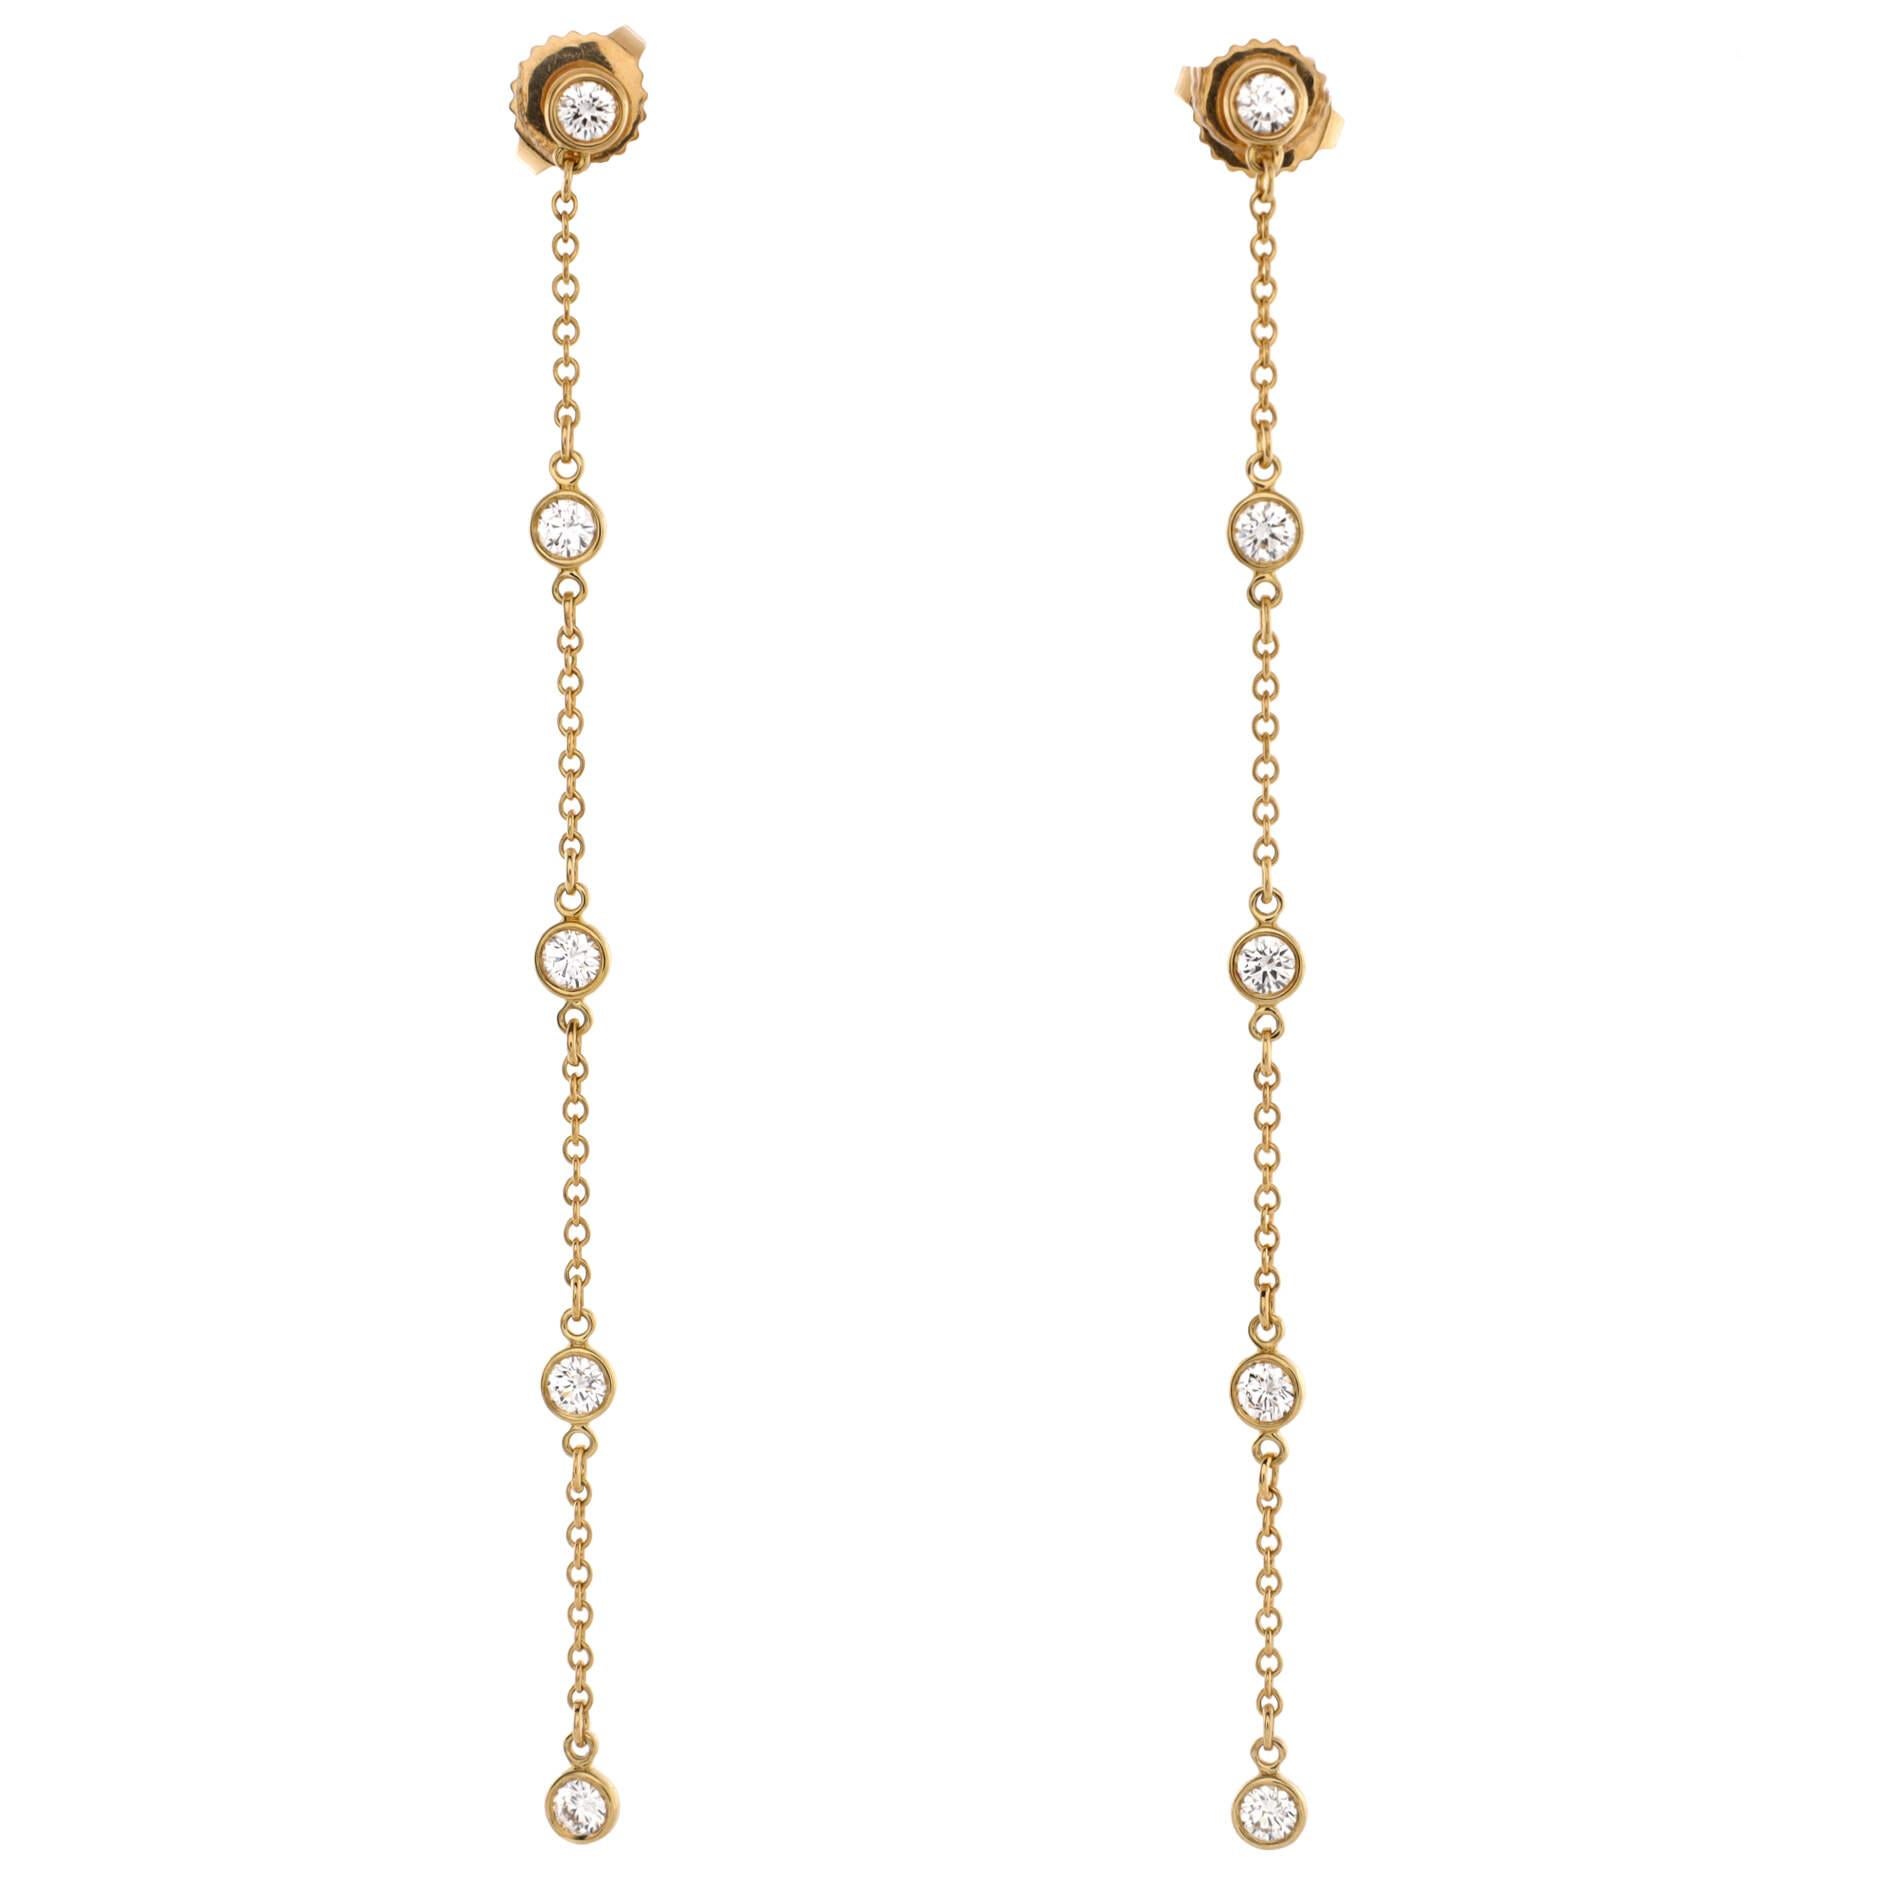 Condition: Excellent. Faint wear throughout.
Accessories: No Accessories
Measurements: Height/Length: 73.70 mm, Width: 3.40 mm
Designer: Tiffany & Co.
Model: Elsa Peretti Diamonds By The Yard Drop Earrings 18K Yellow Gold with Diamonds
Exterior